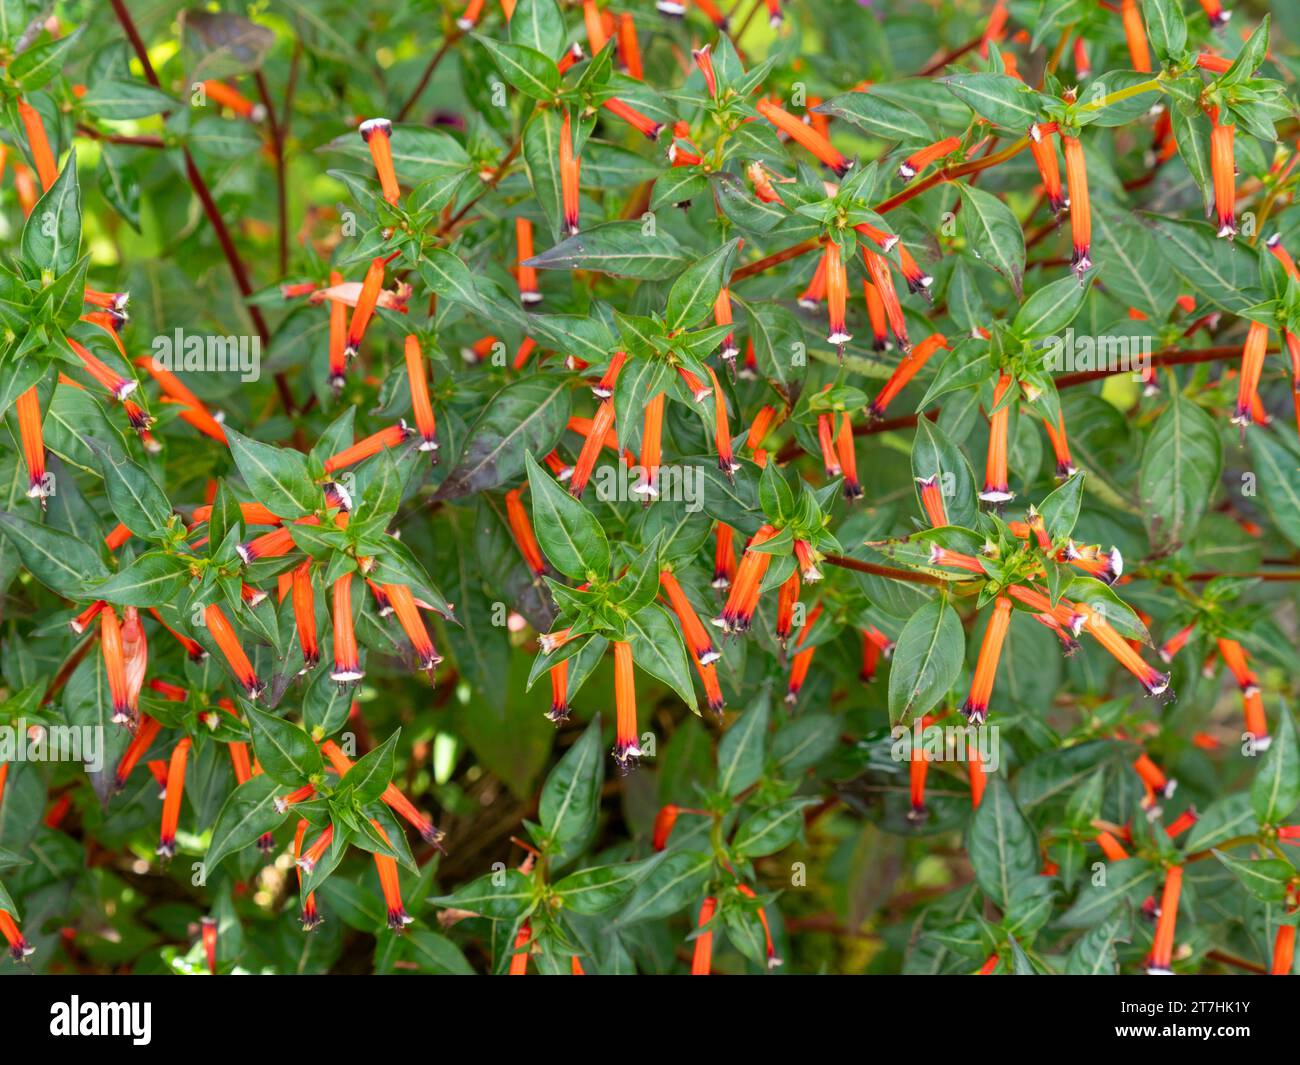 Mexican Cigar Plant  Cuphea ignea 'Matchless' Stock Photo